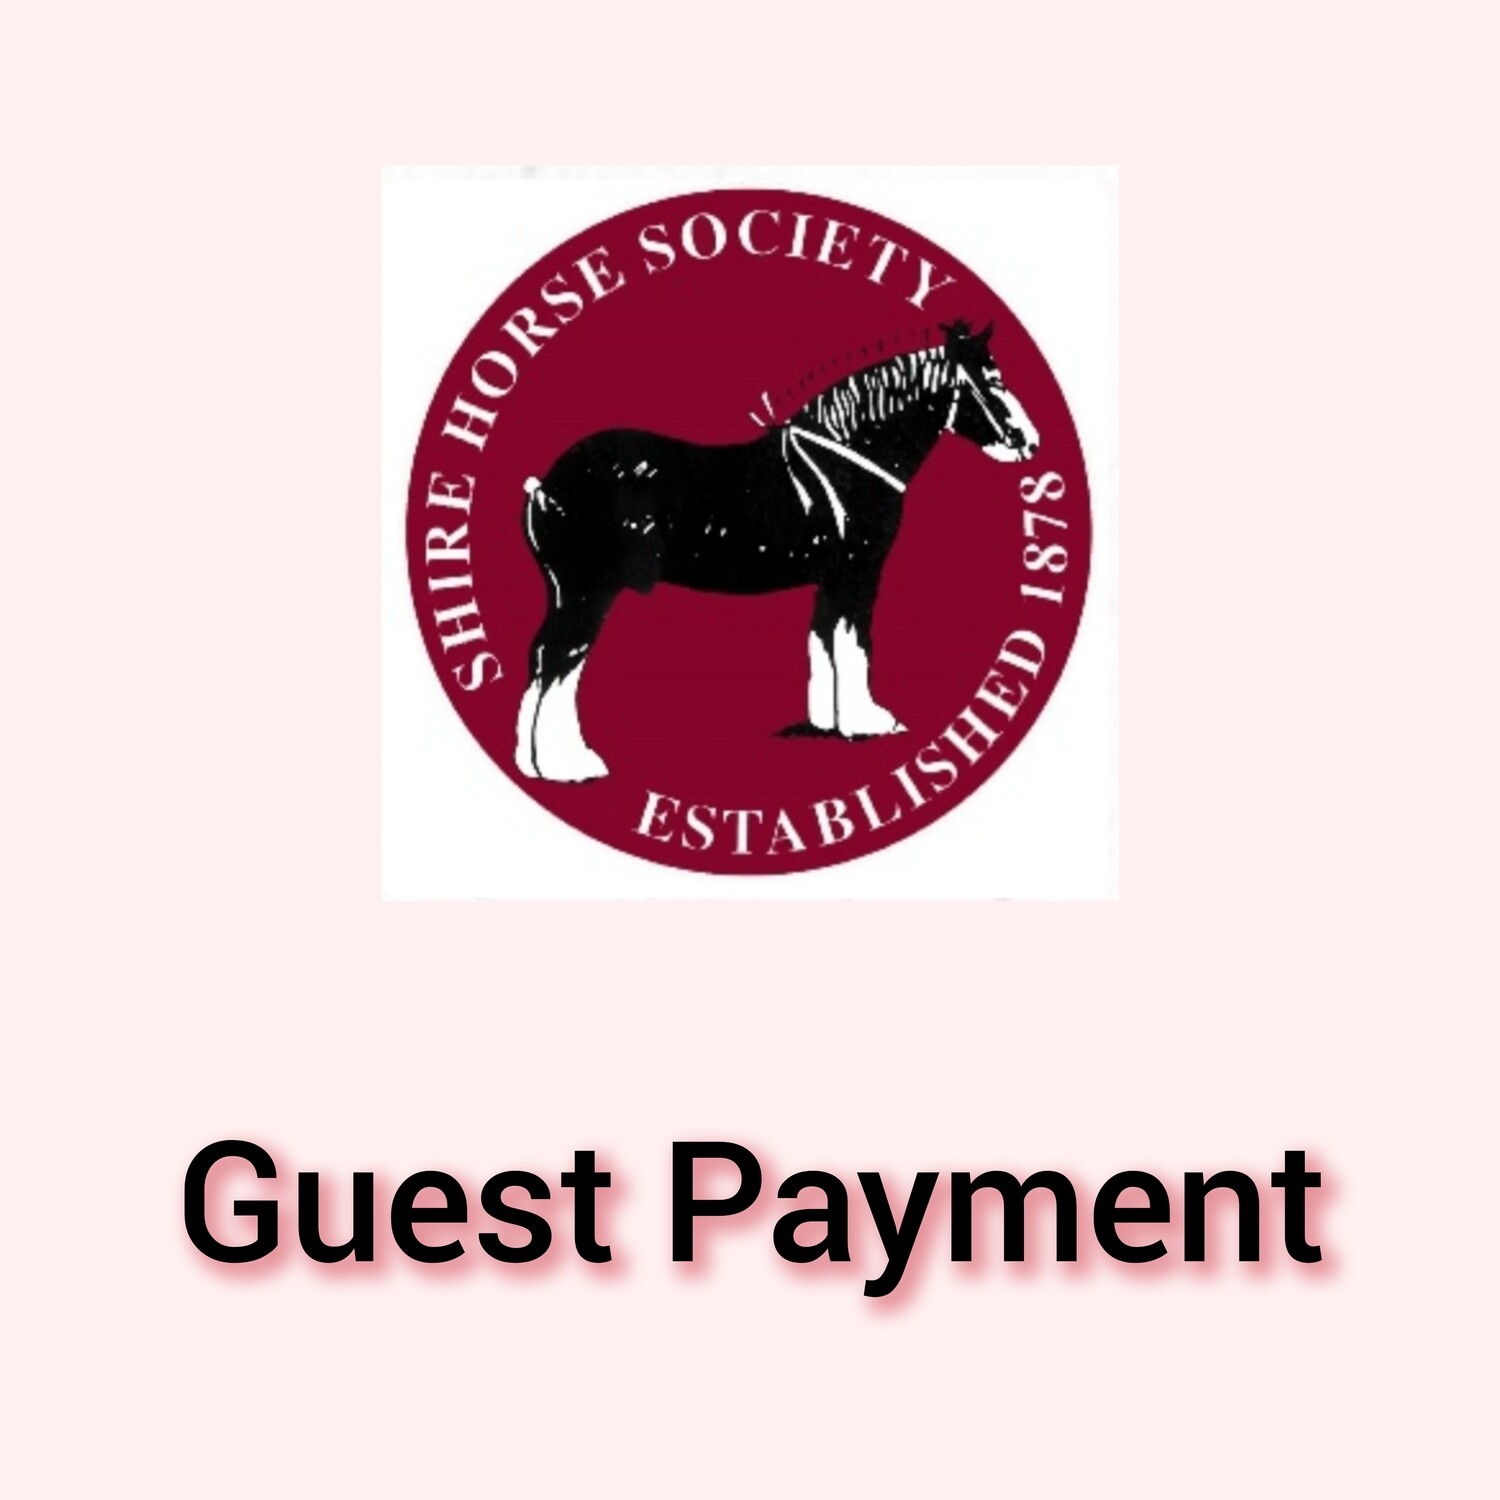 5. Guest Payment